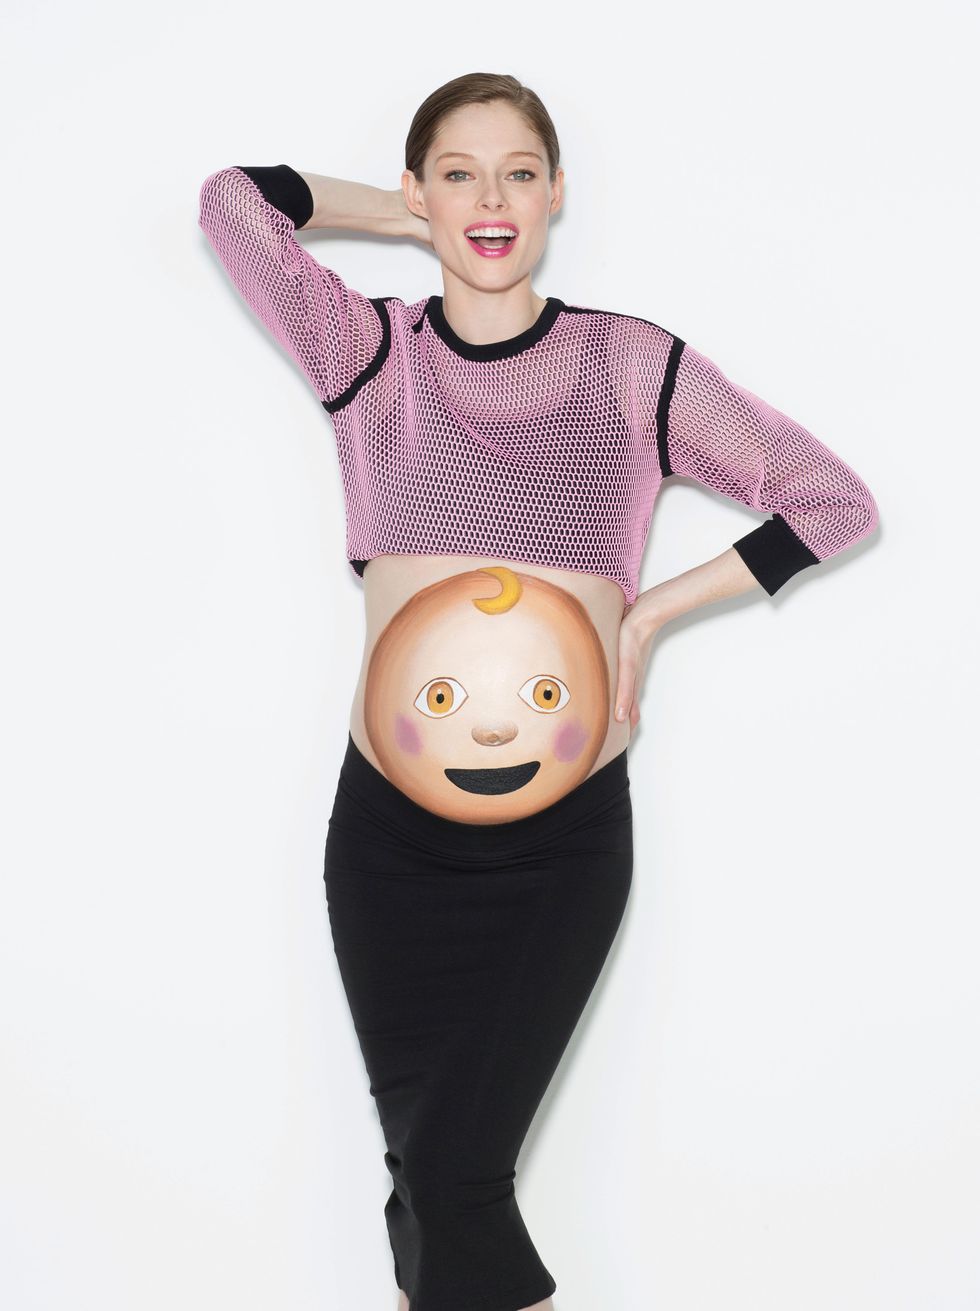 See What Happens When Pregnant Women Turn Their Bellies Into Art - Sara  Blakely's Belly Art Project